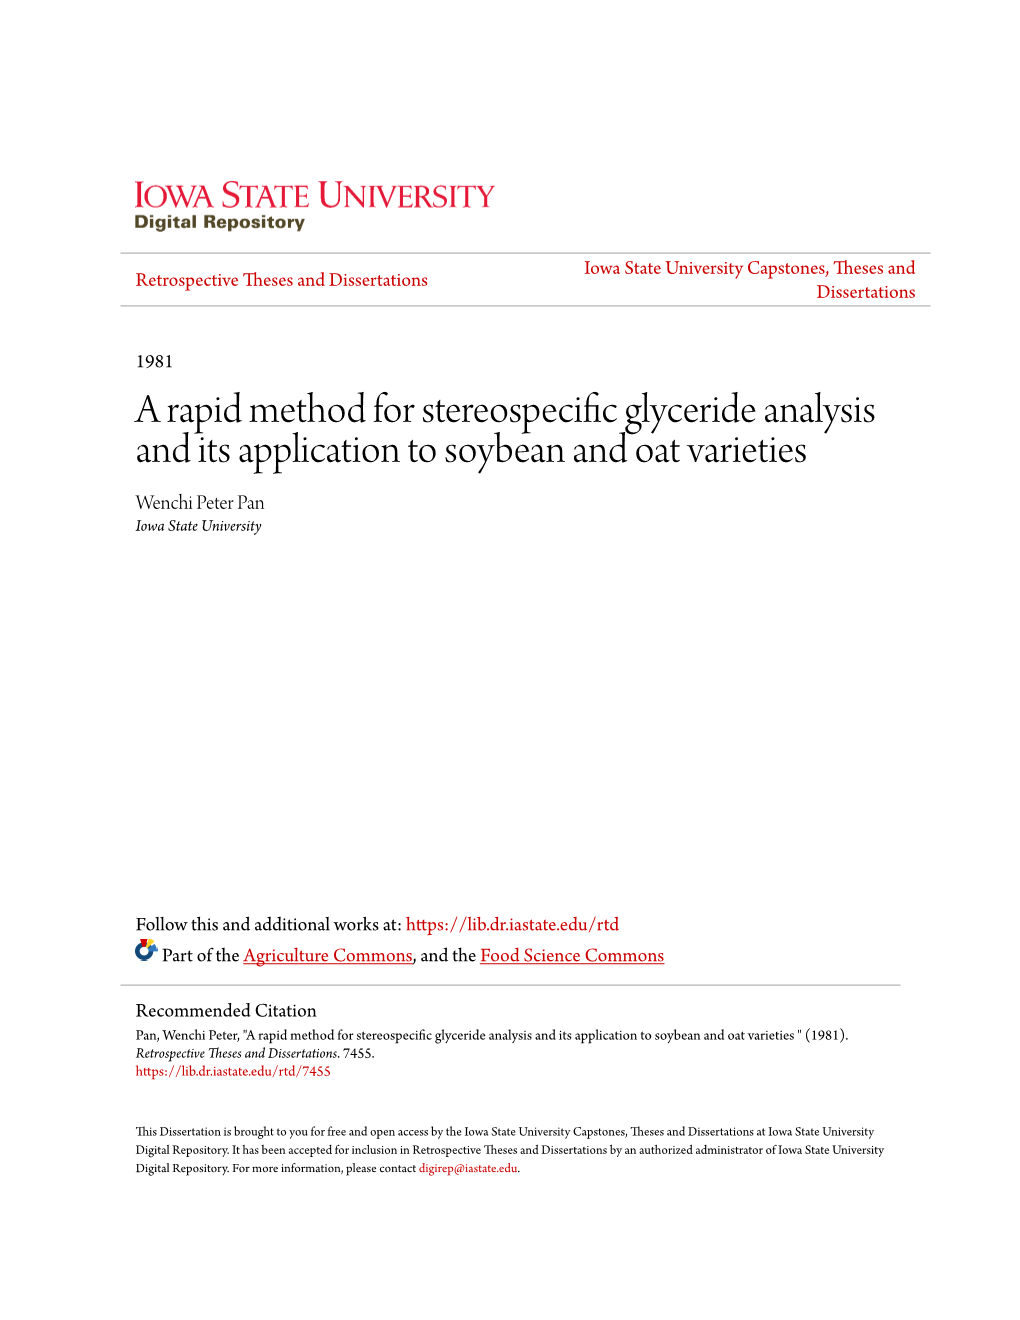 A Rapid Method for Stereospecific Glyceride Analysis and Its Application to Soybean and Oat Varieties Wenchi Peter Pan Iowa State University